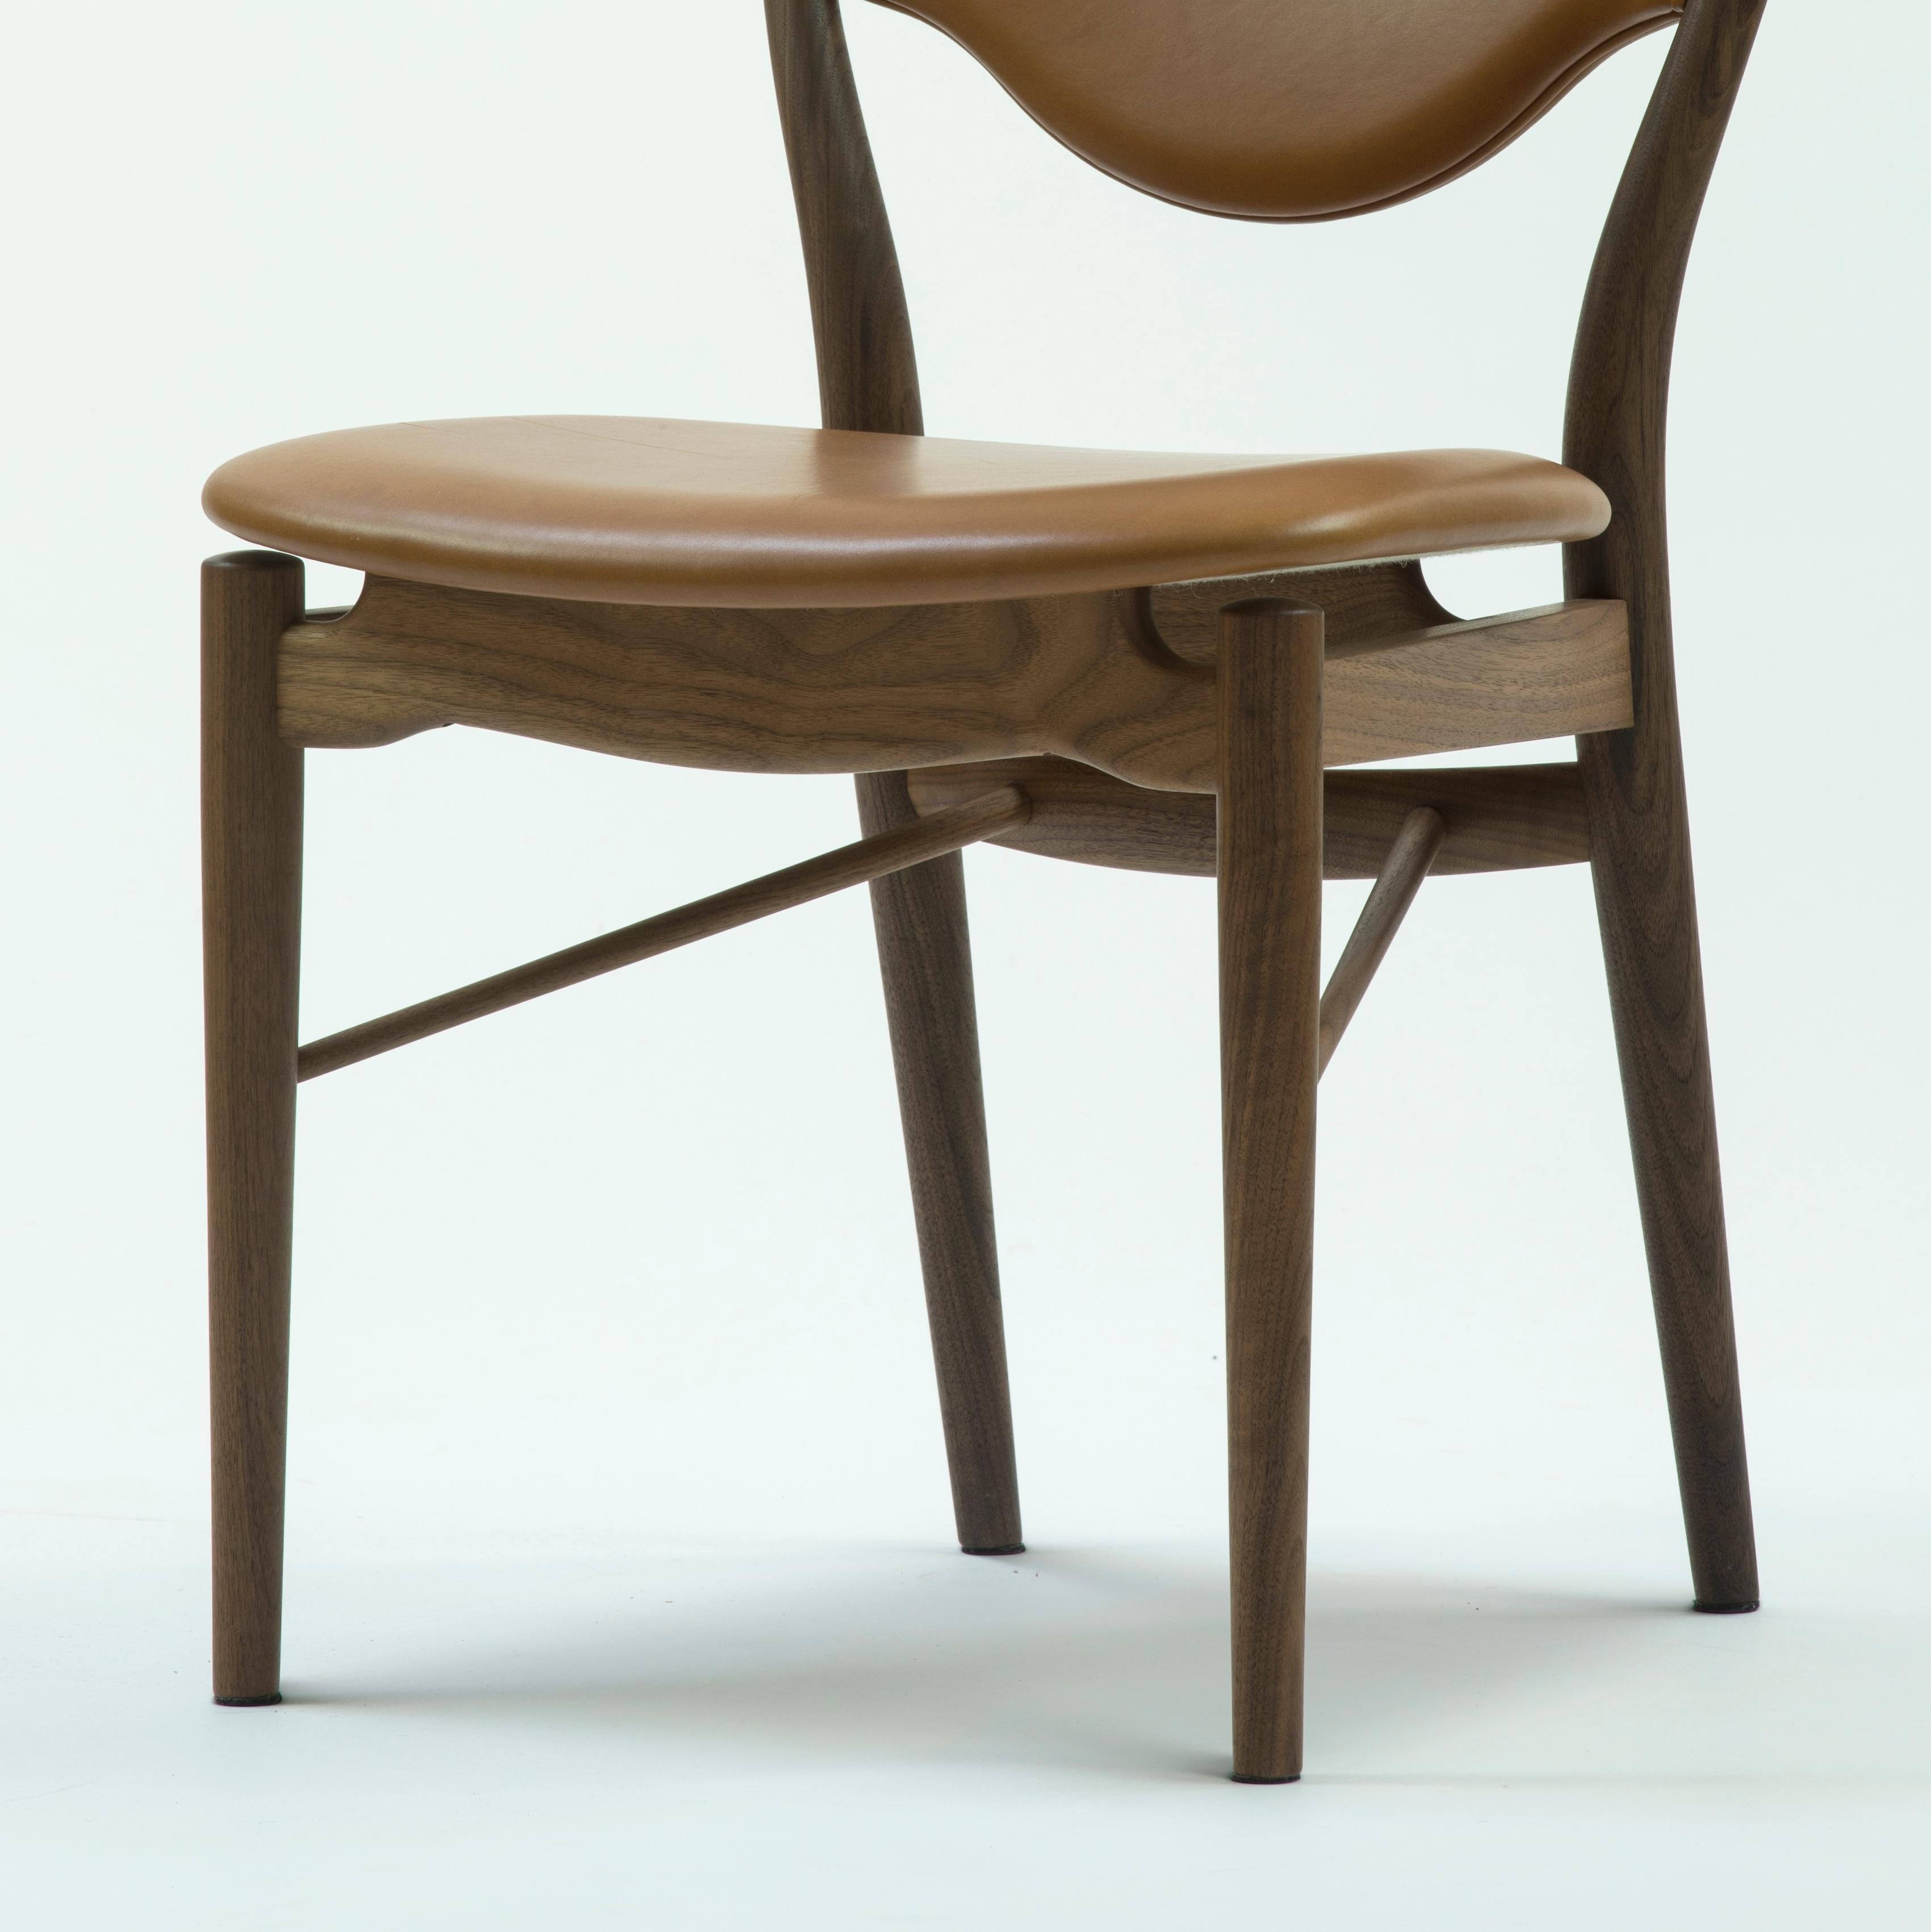 Chair designed by Finn Juhl in 1946, relaunched in 2018.
Manufactured by House of Finn Juhl in Denmark.

Finn Juhl originally designed the 46 Chair for cabinetmaker Niels Vodder and presented the chair at the Cabinetmakers' Guild Exhibition in